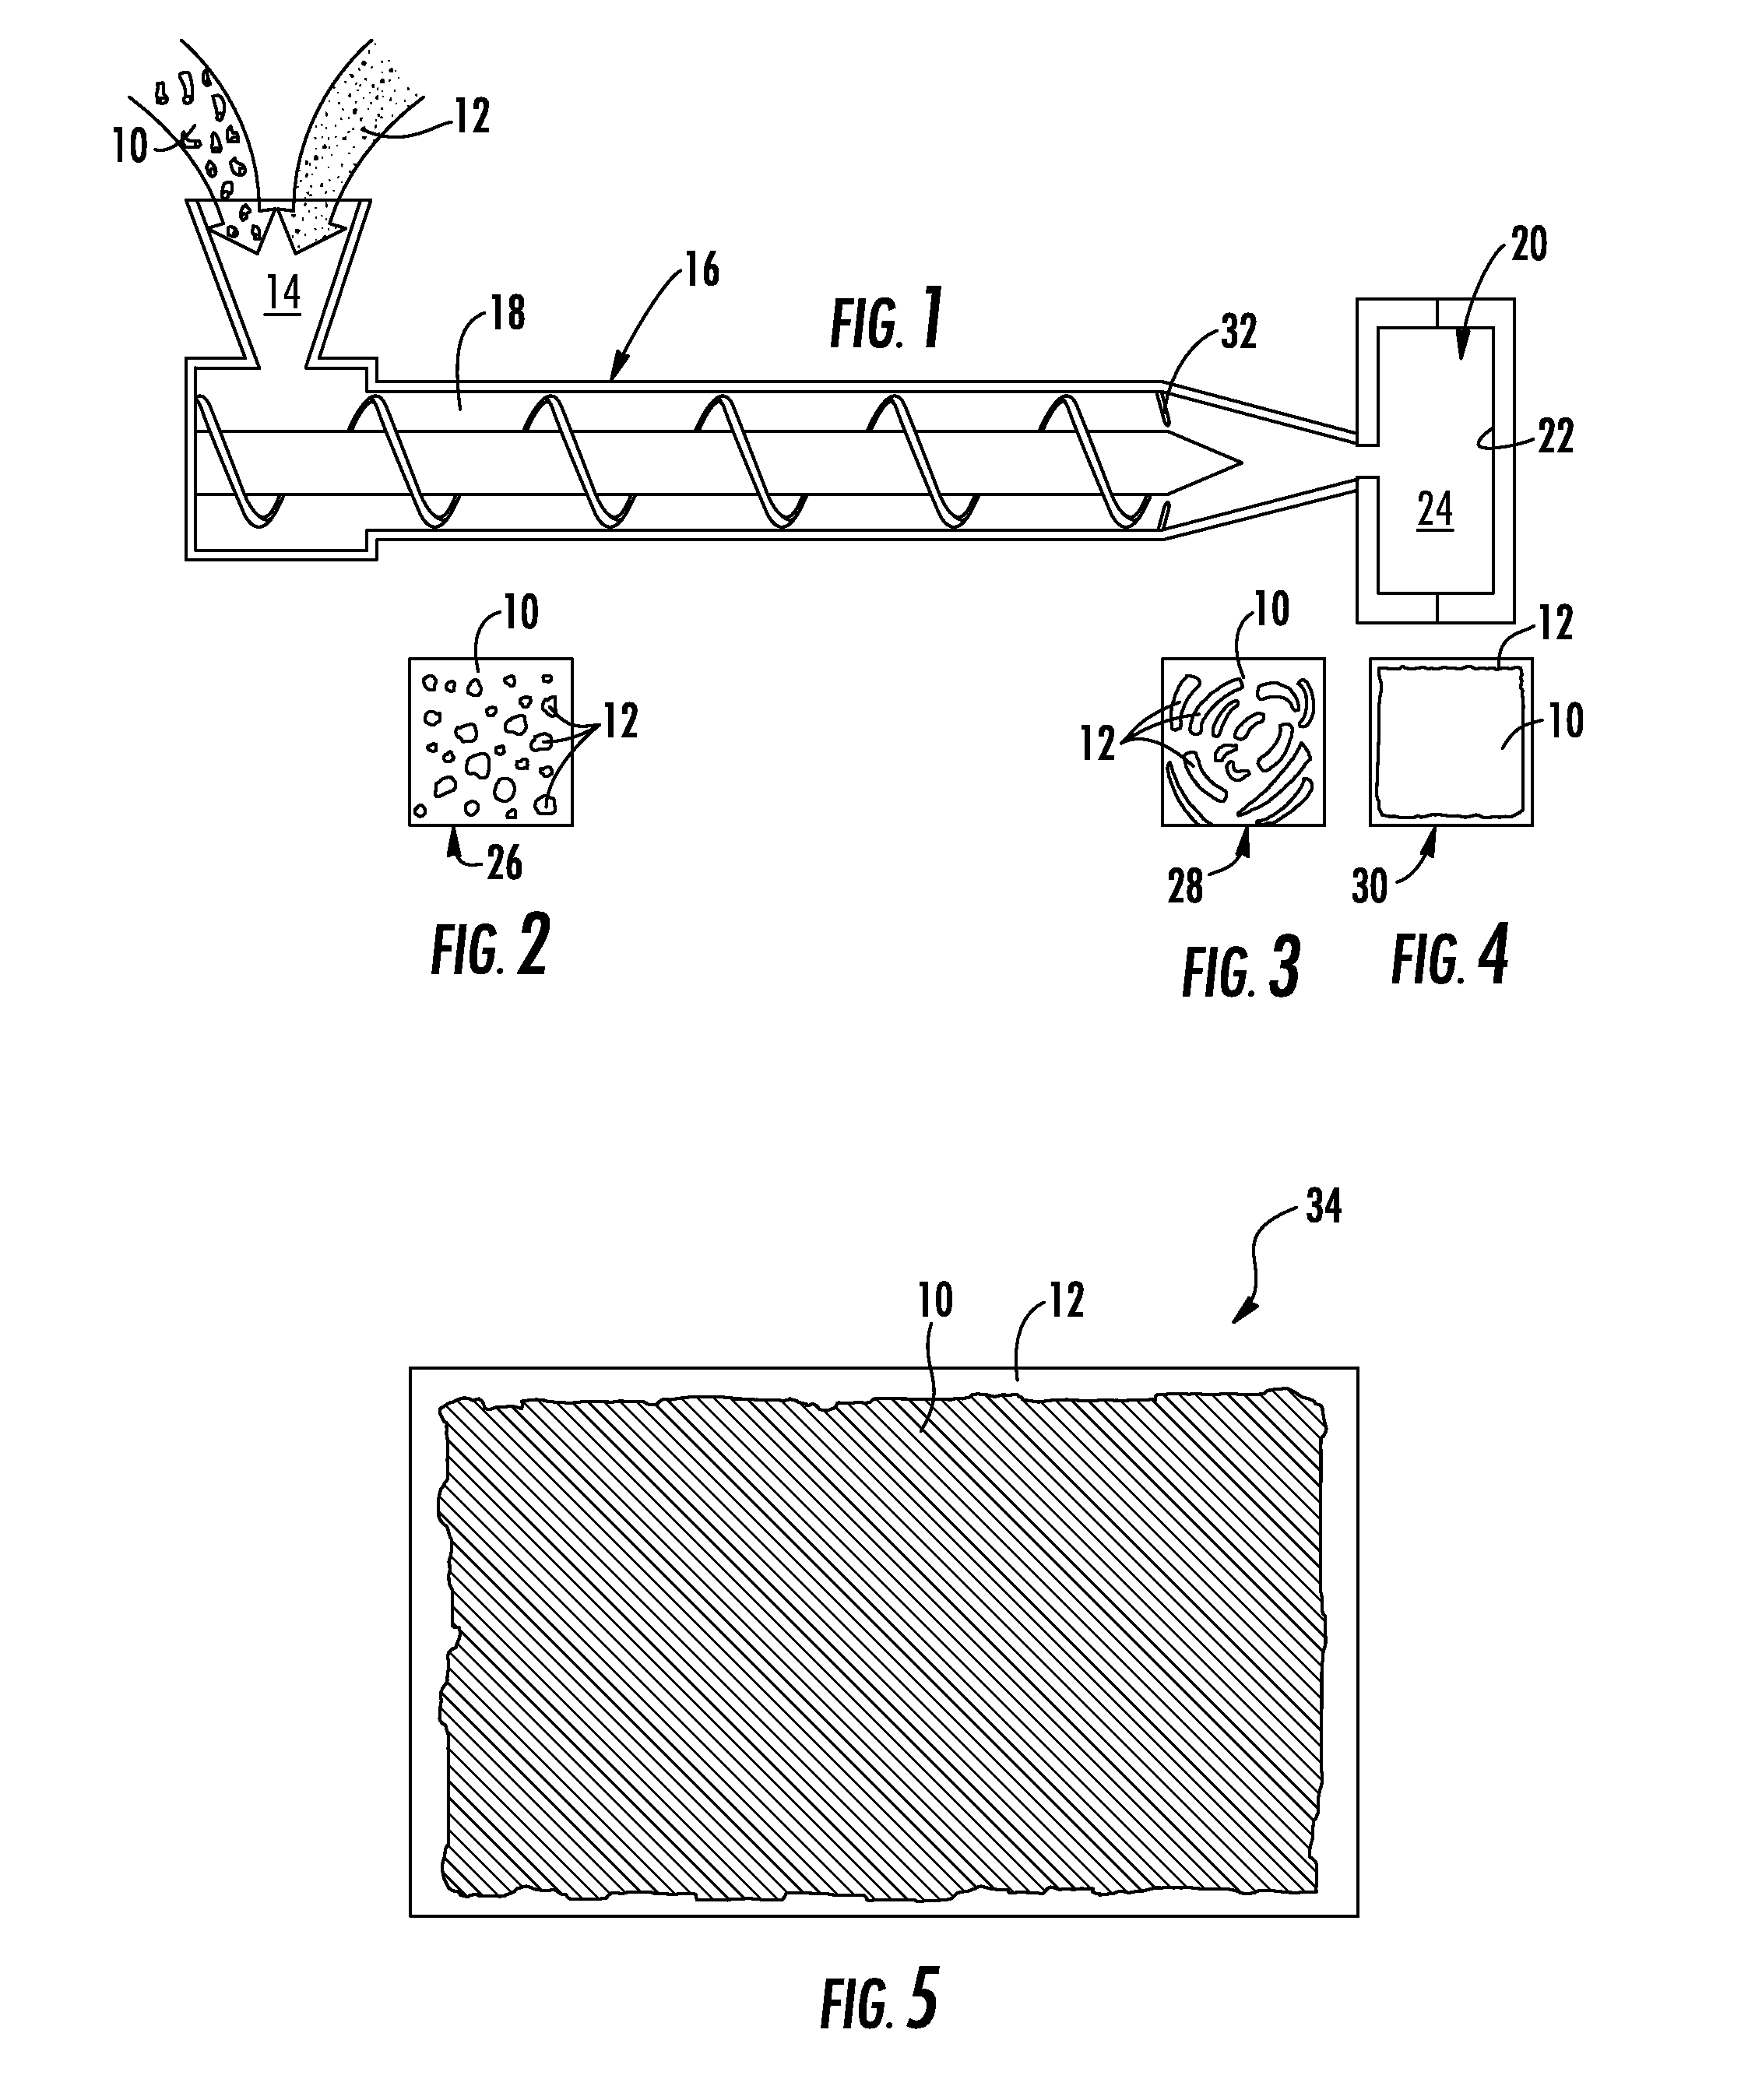 Molding composition for forming in-mold metallized polymer components